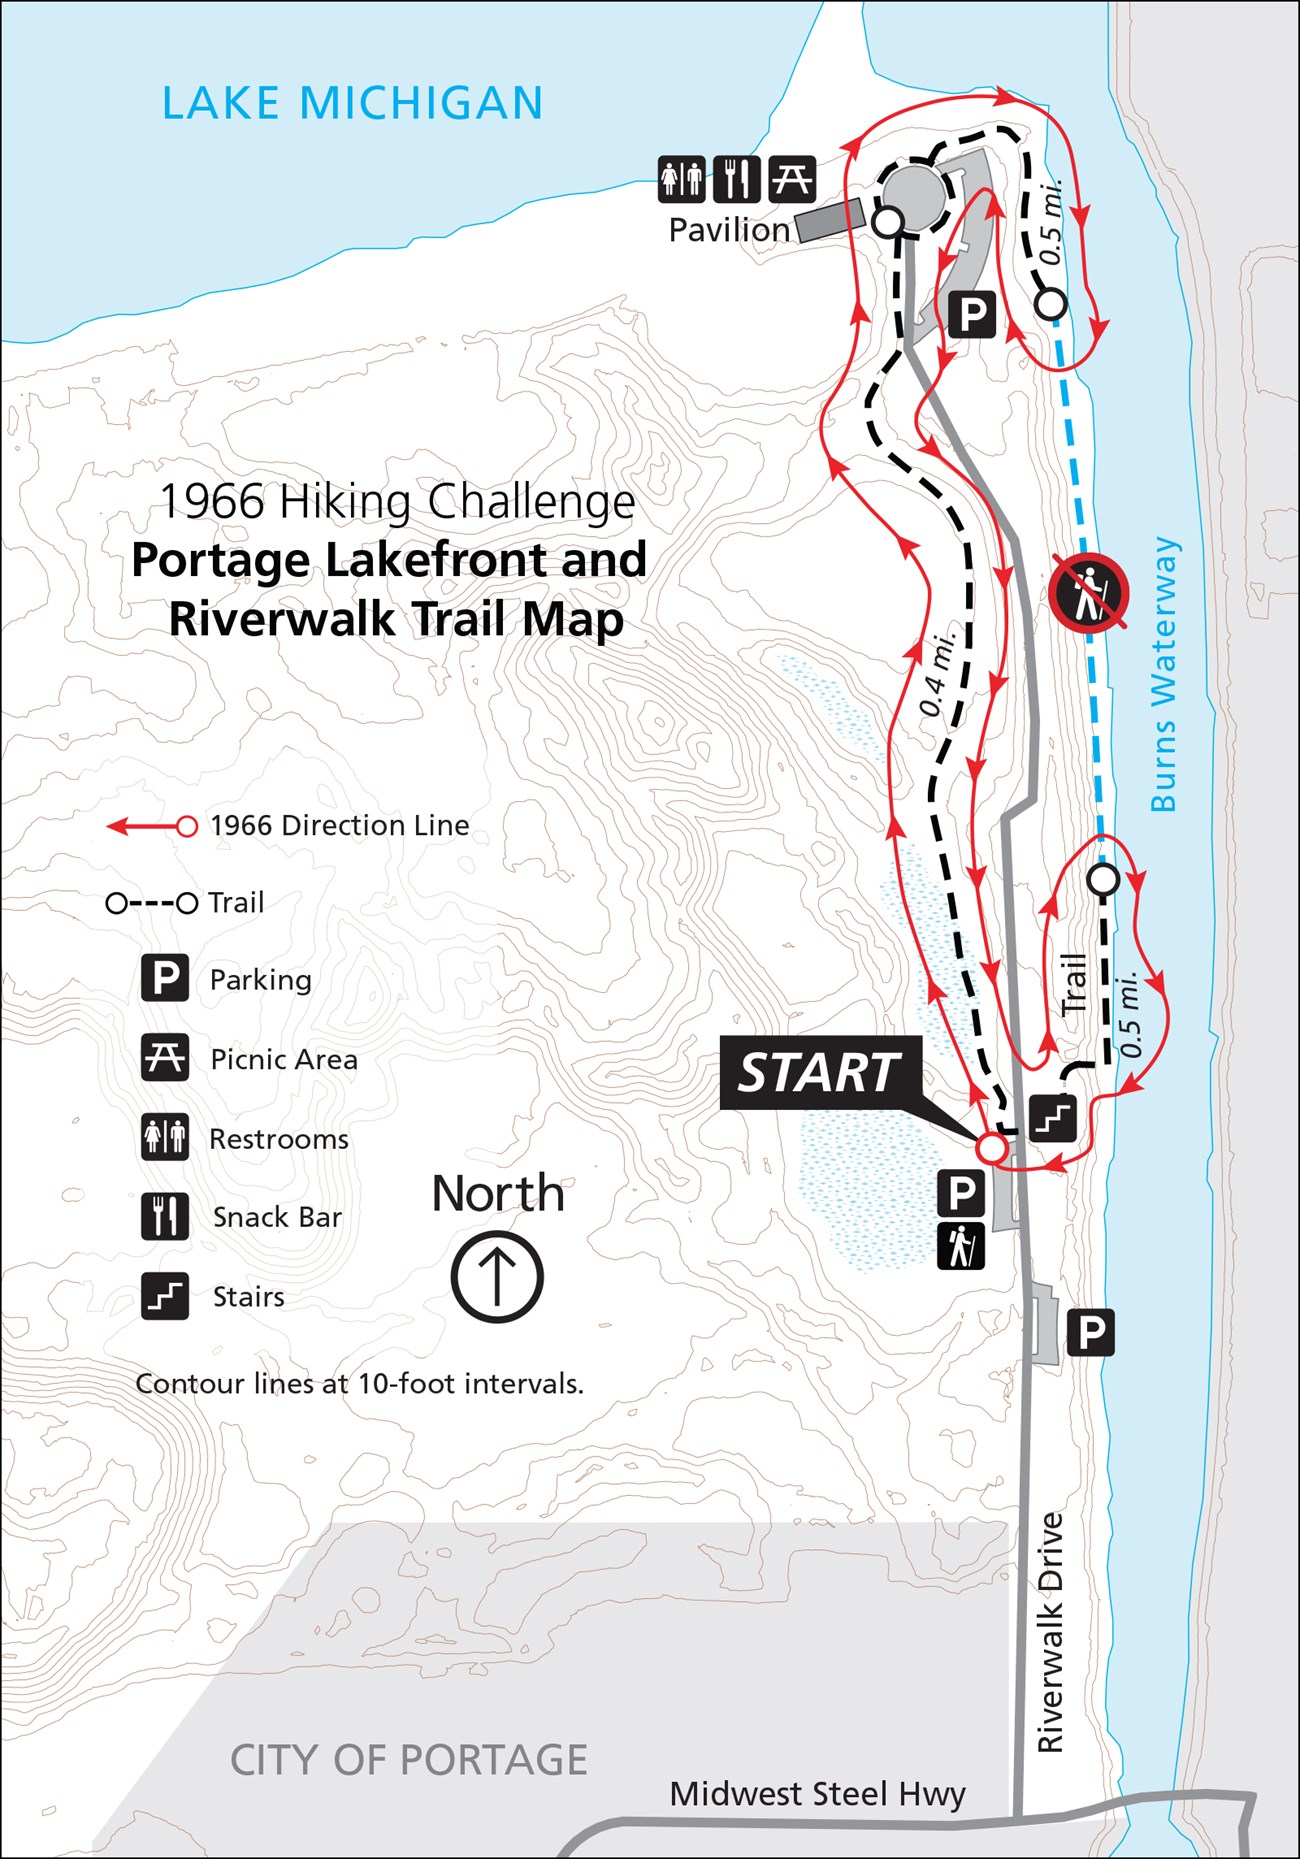 Portage Lakefront and Riverwalk 1966 Hiking Challenge Trail Map